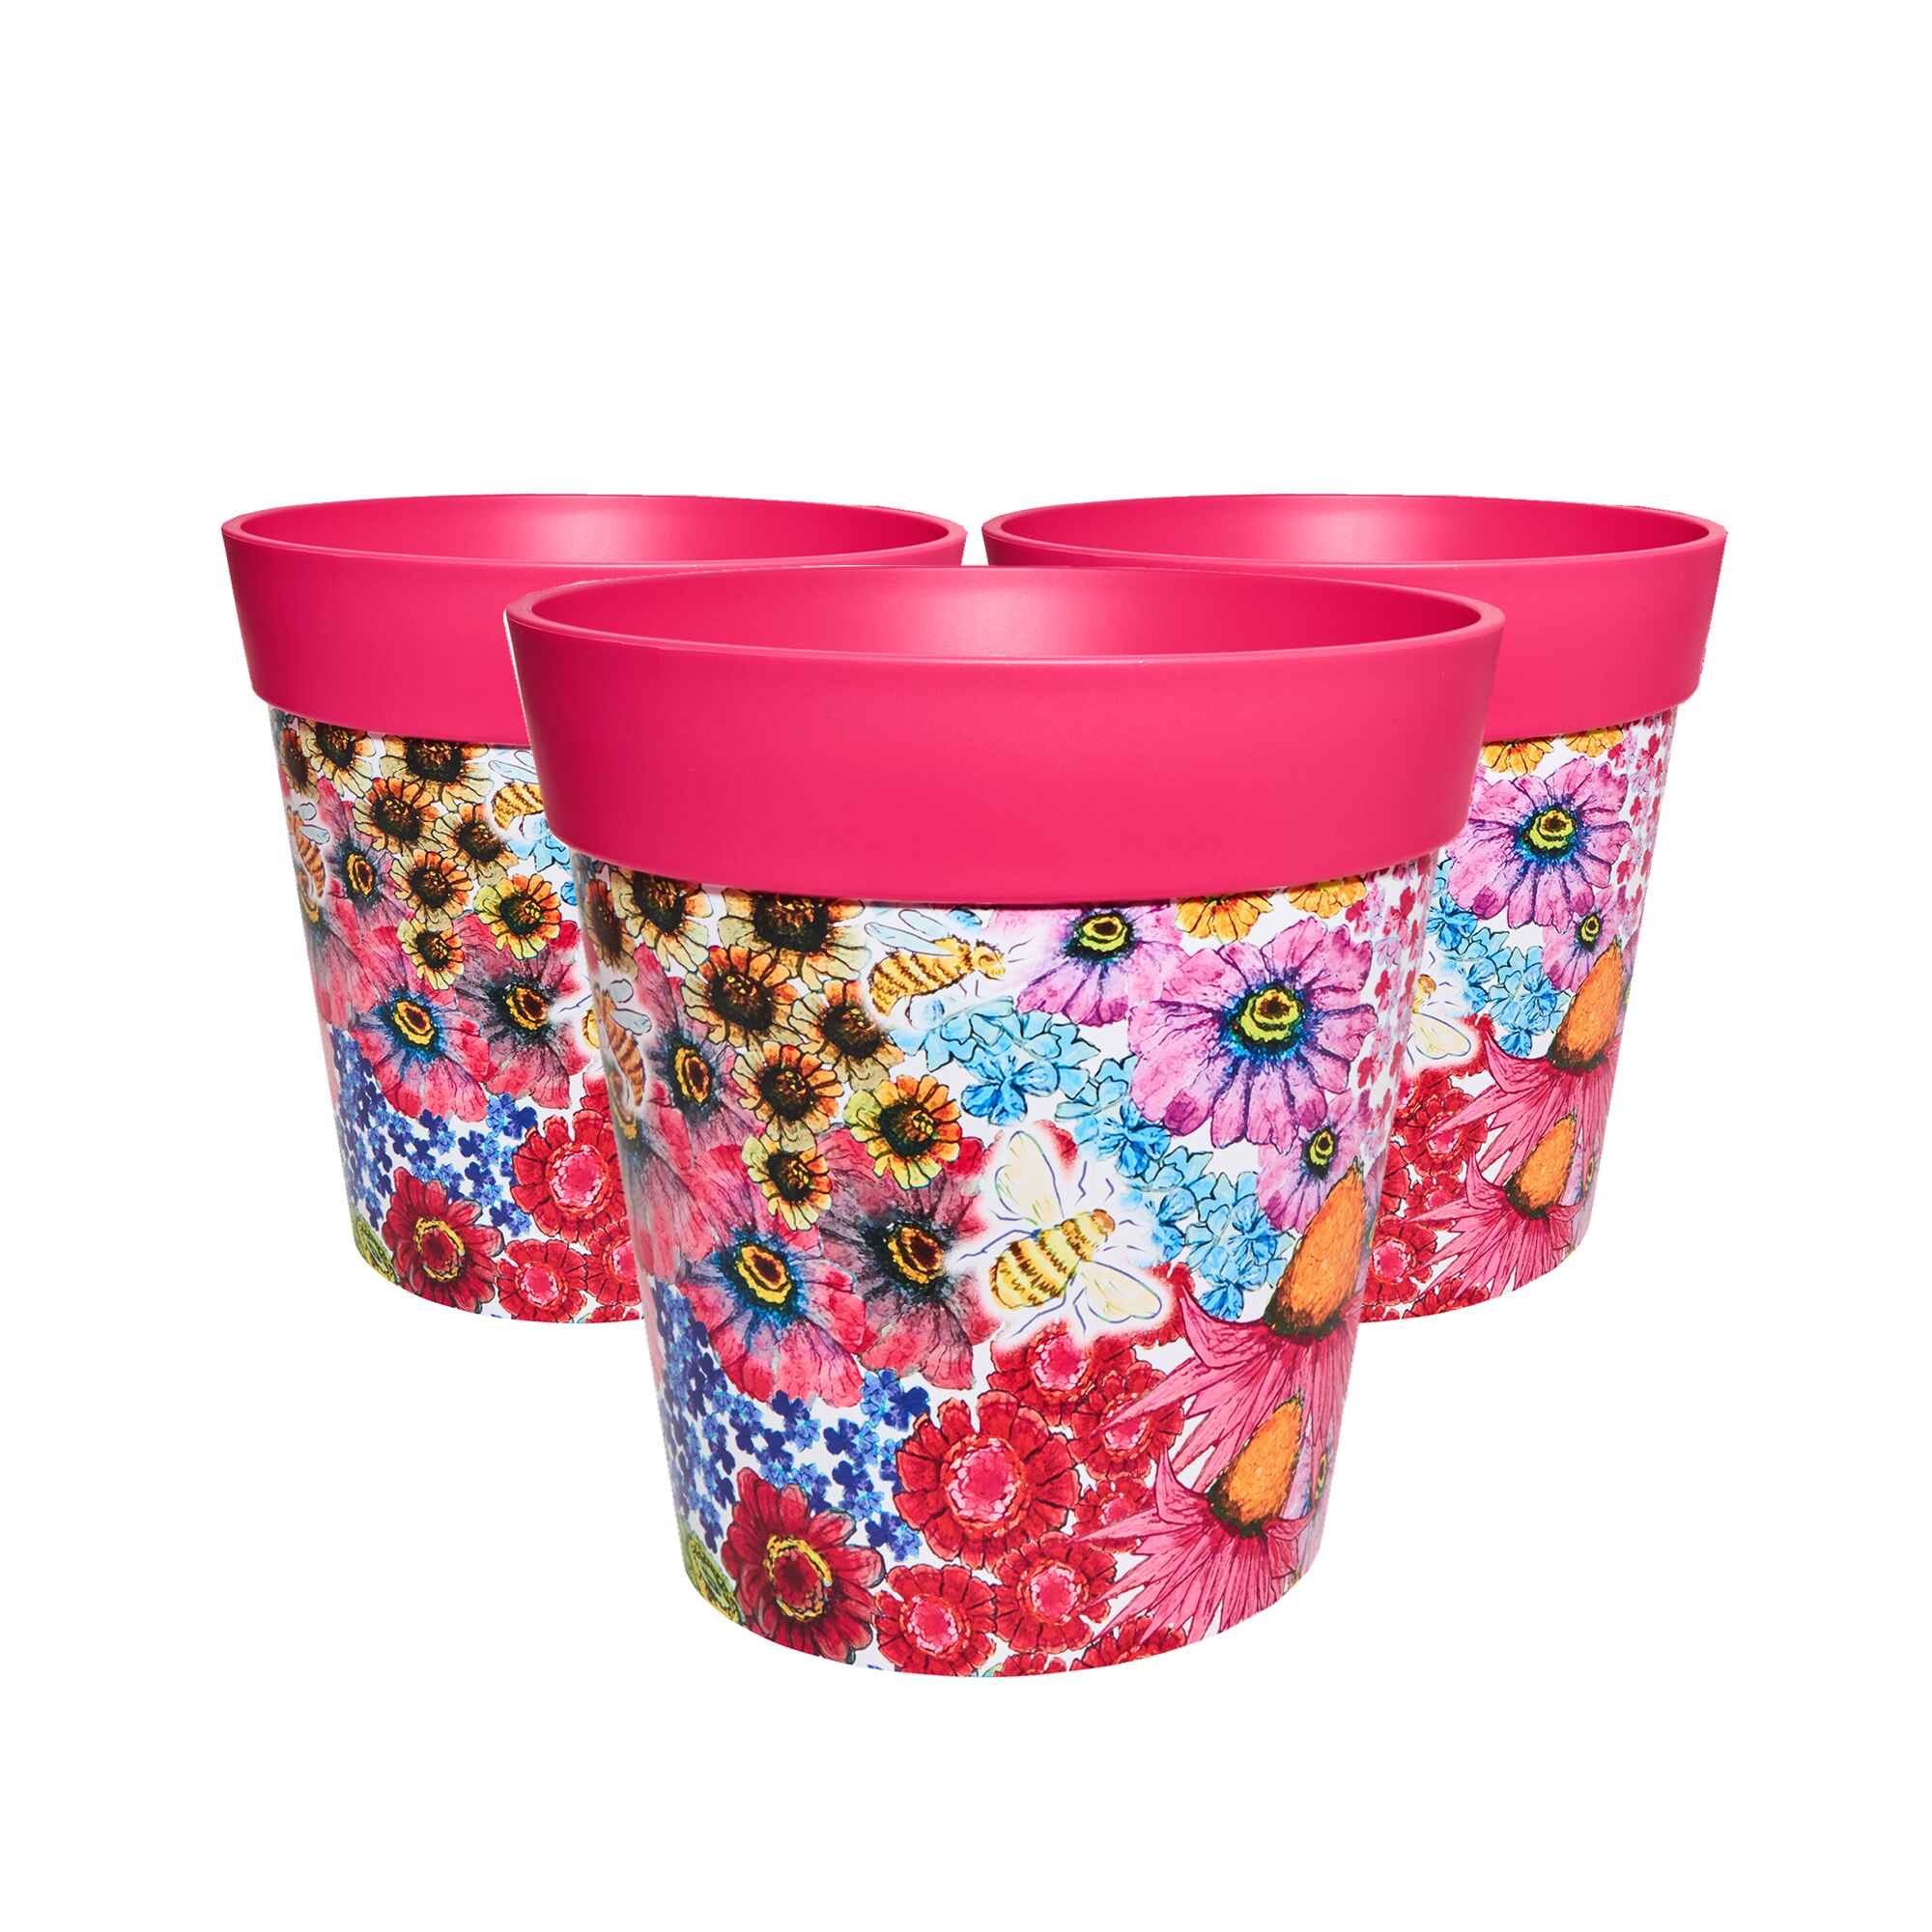 Picture of 3 Large 25cm Plastic Pink Bees and Flowers Pattern Indoor/Outdoor Flowerpots